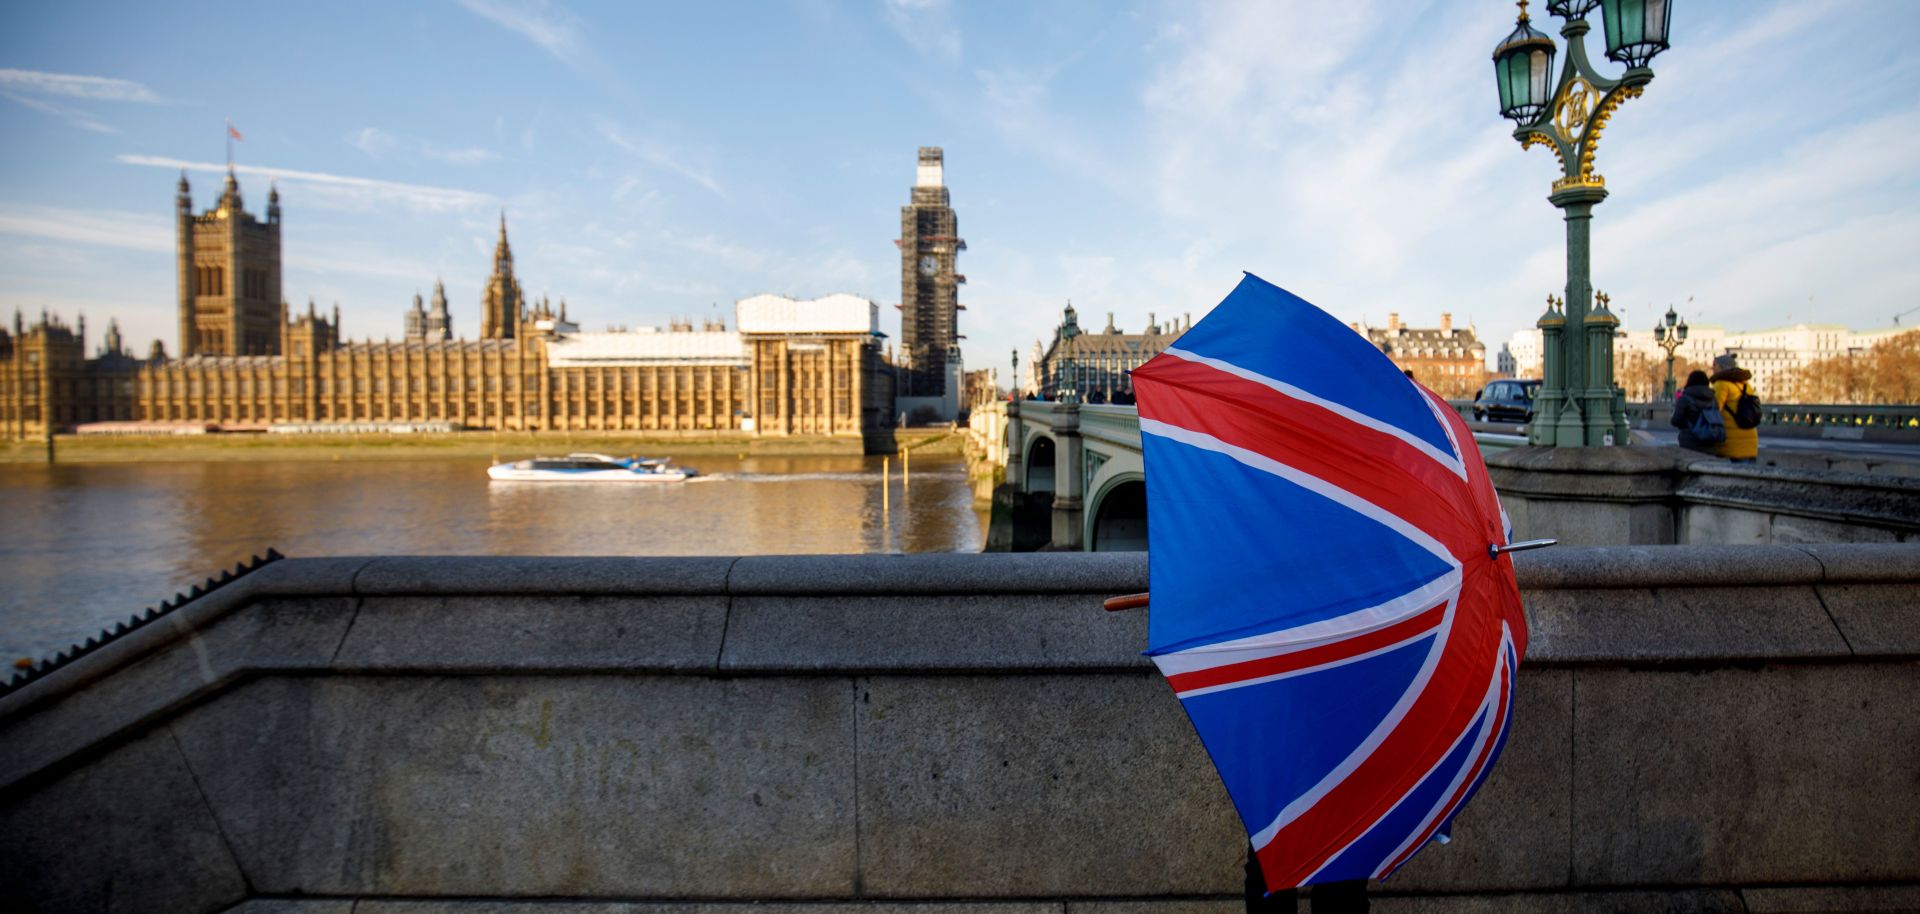 A souvenir stall holder opens a Union Flag umbrella as he arranges his stock opposite the Houses of Parliament on the southern bank of the River Thames in central London.